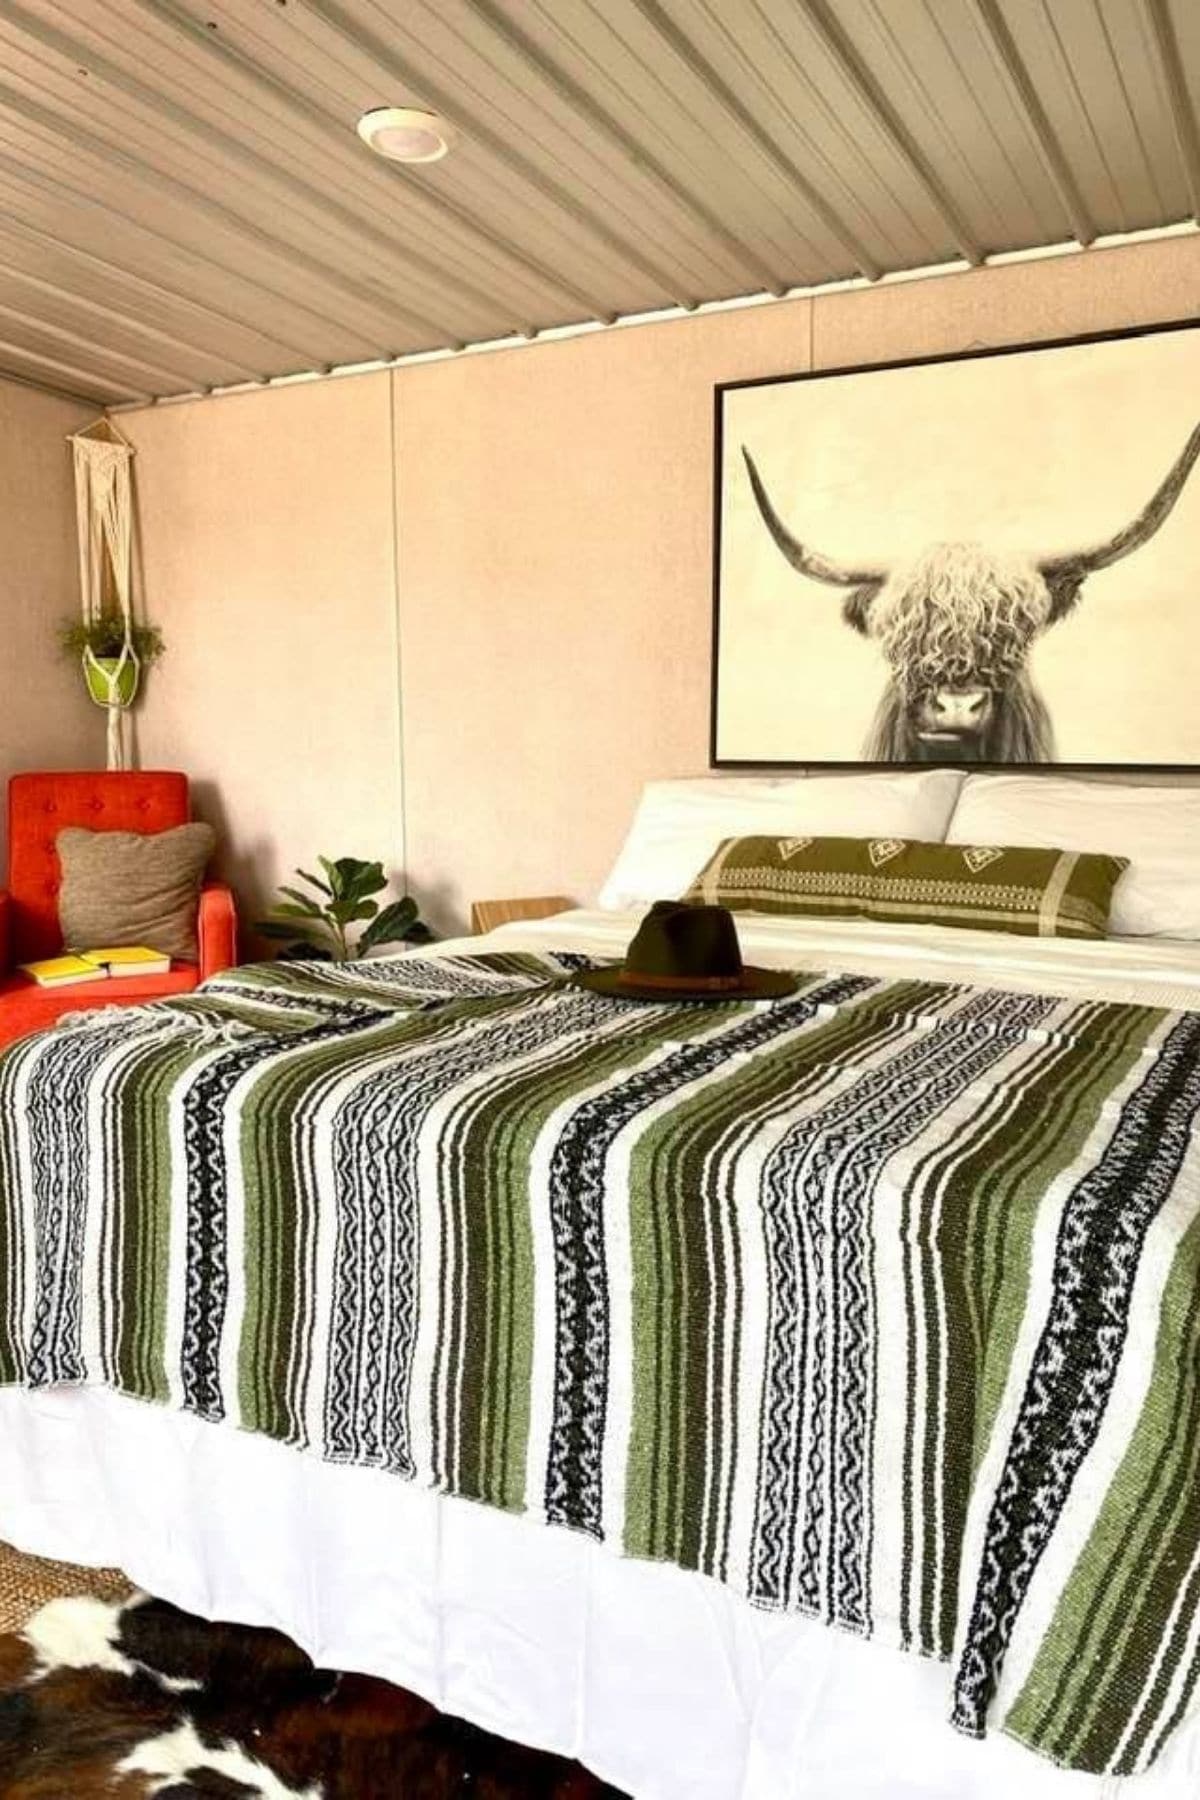 southwest styled blanket on end of bed with bull image on wall above bed